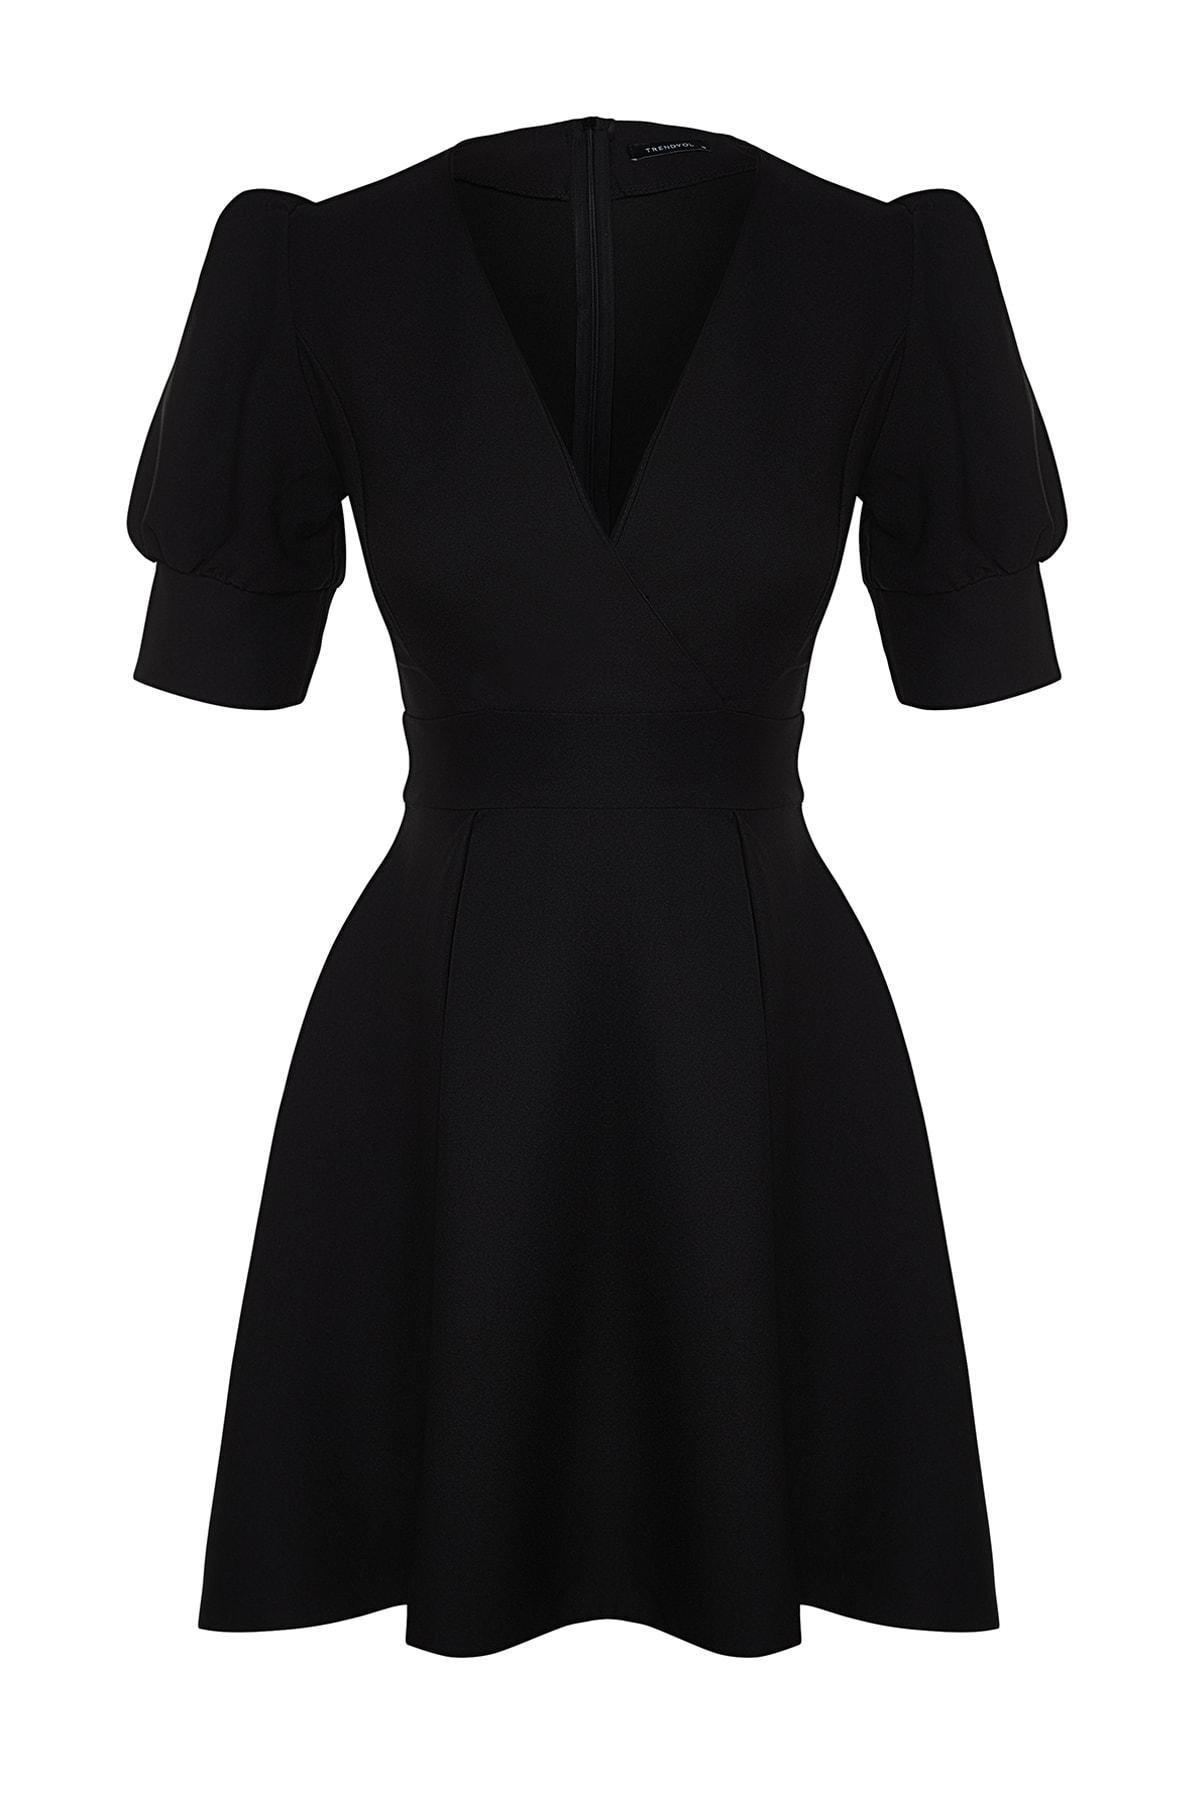 Trendyol - Black A-Line Double-Breasted Dress